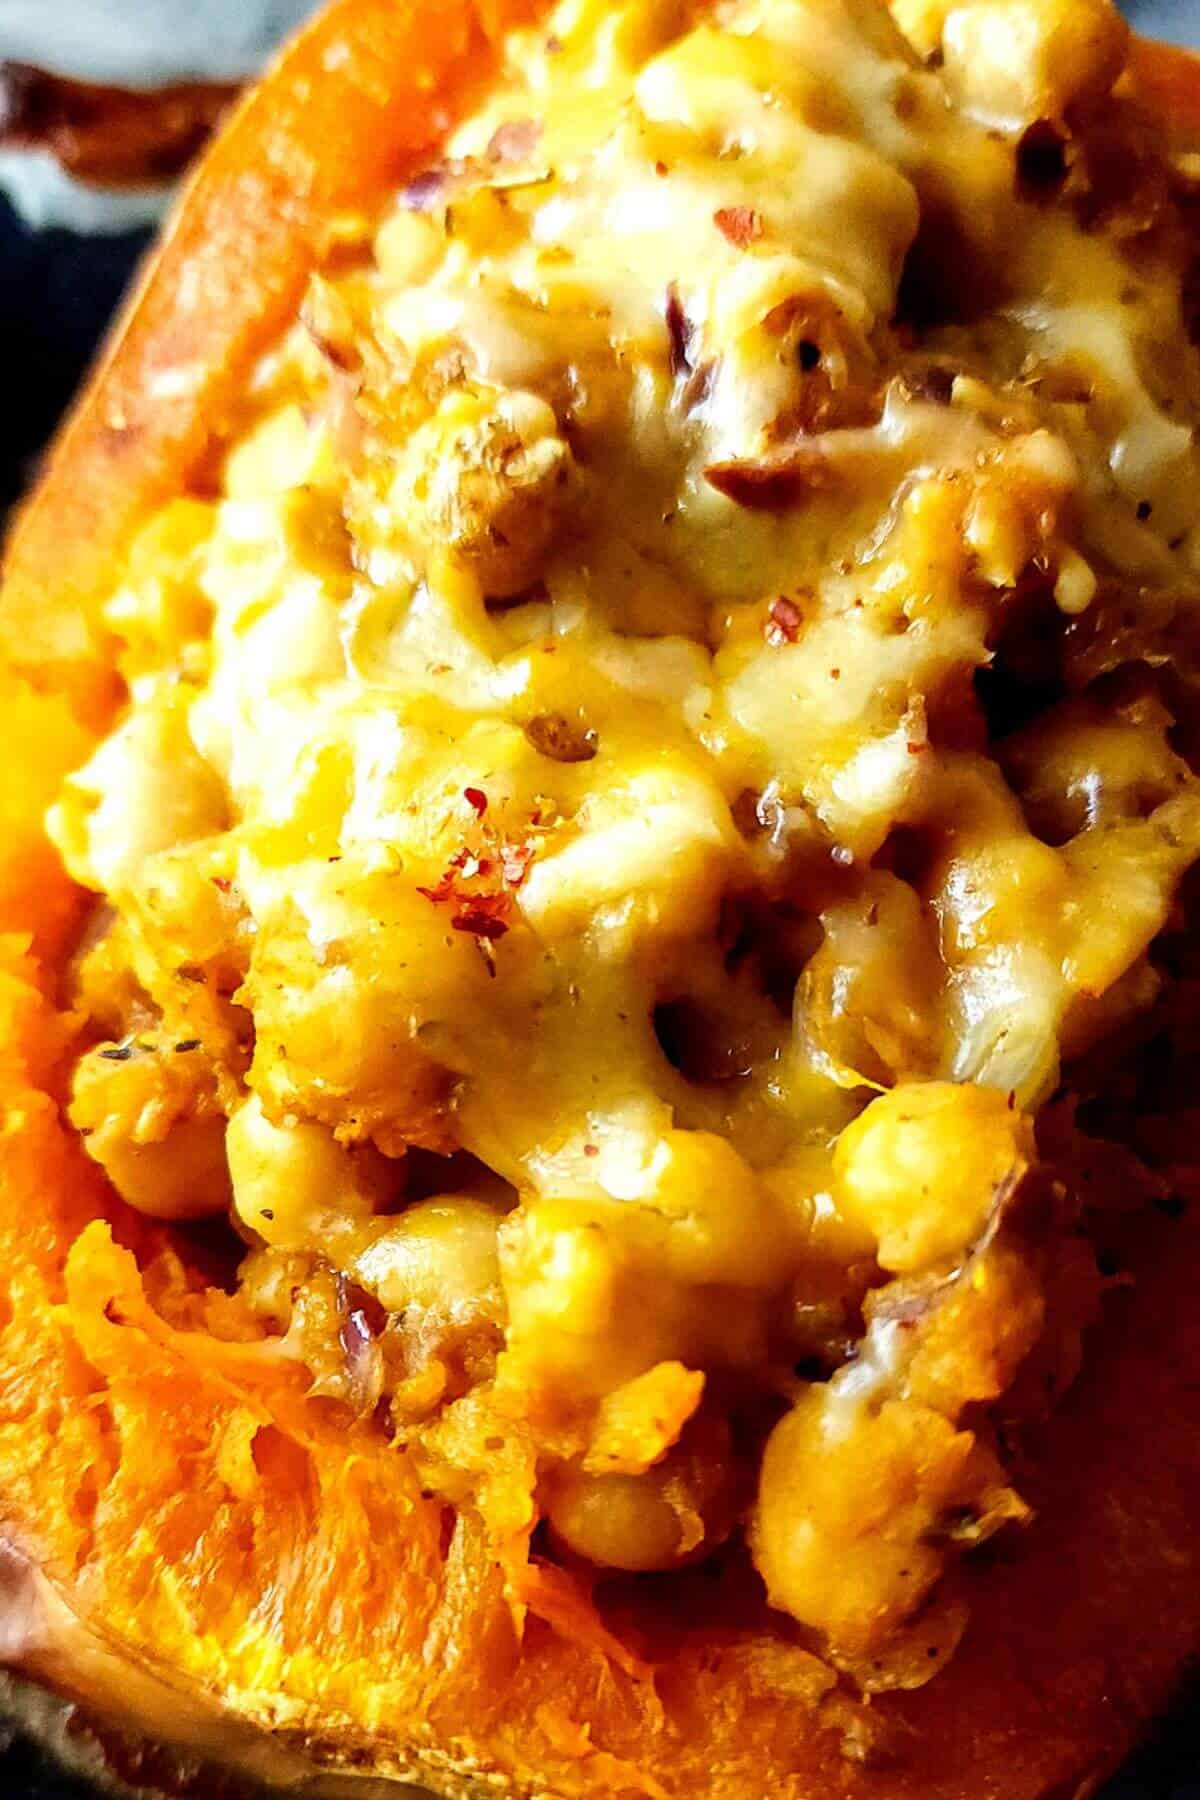 Baked butternut squash stuffed with chickpeas and cheese.